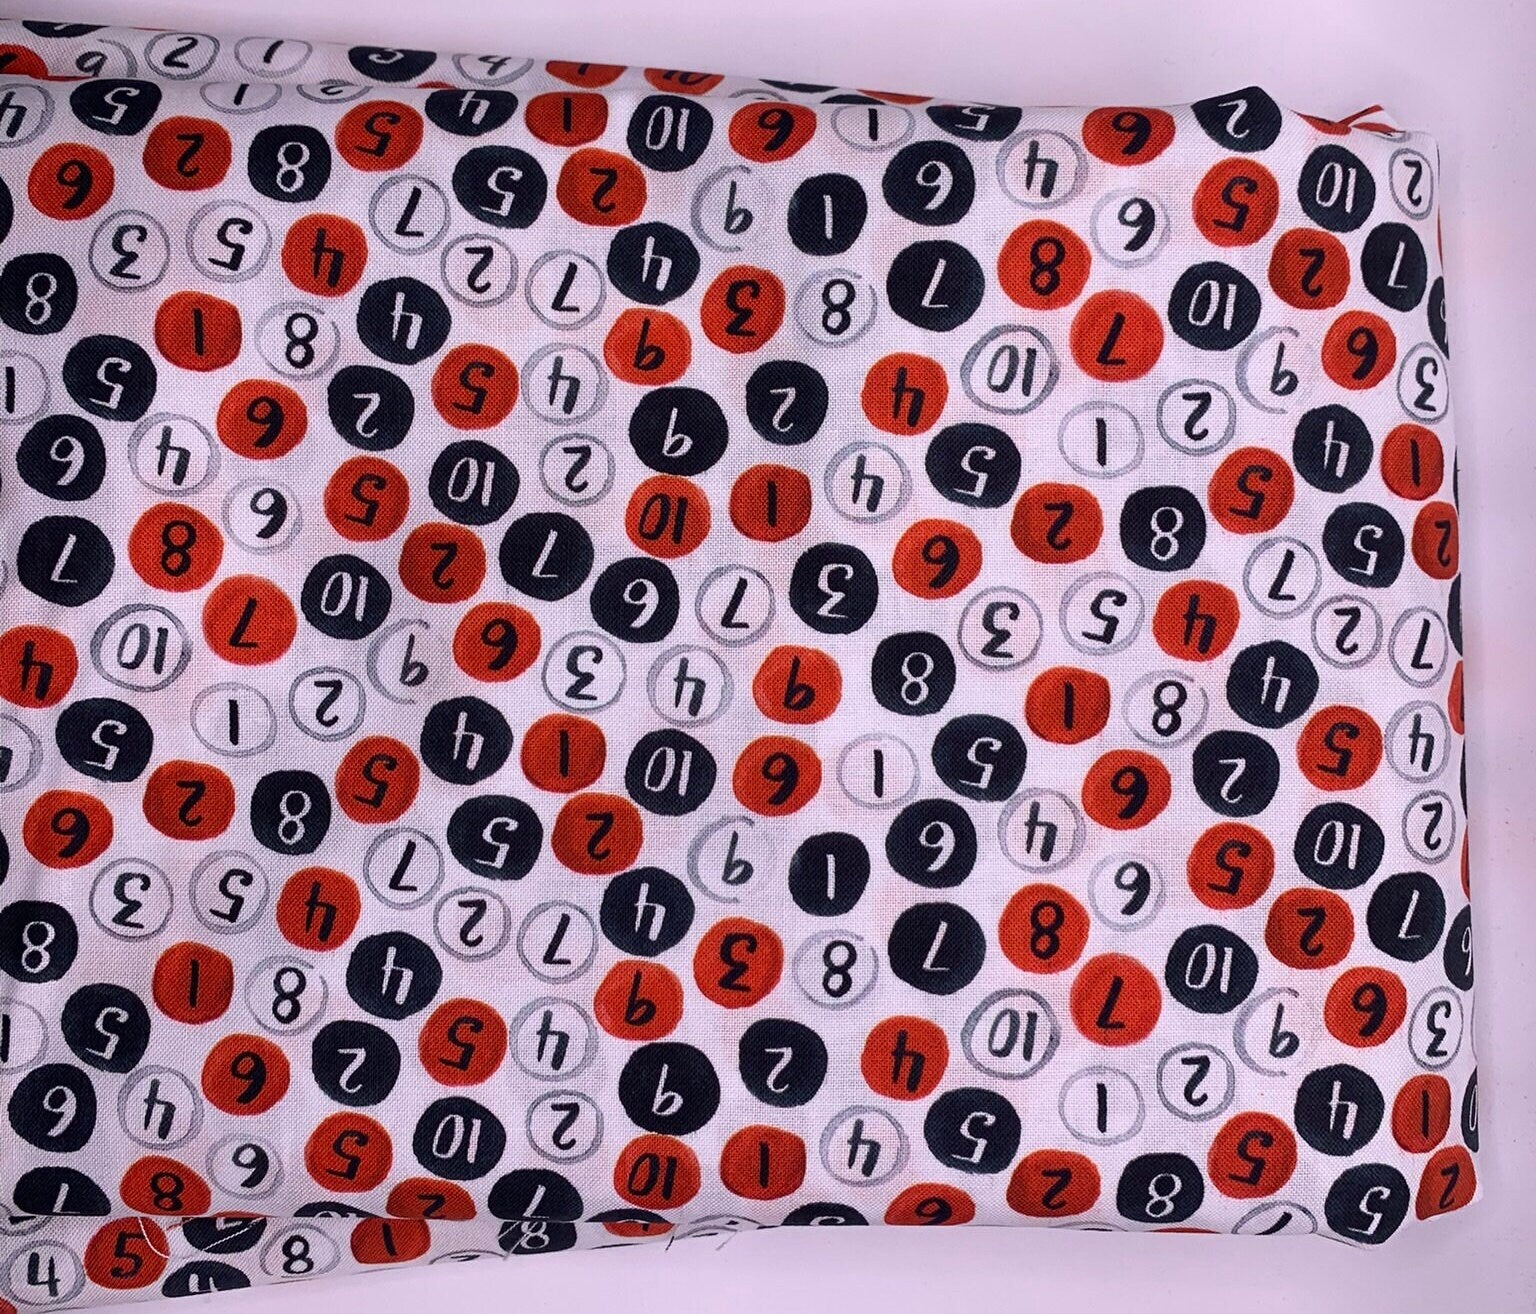 High Quality Quilt Fabric-Sold by the Yard- Dear Stella Fabric- Numbers-100% Cotton Fabric